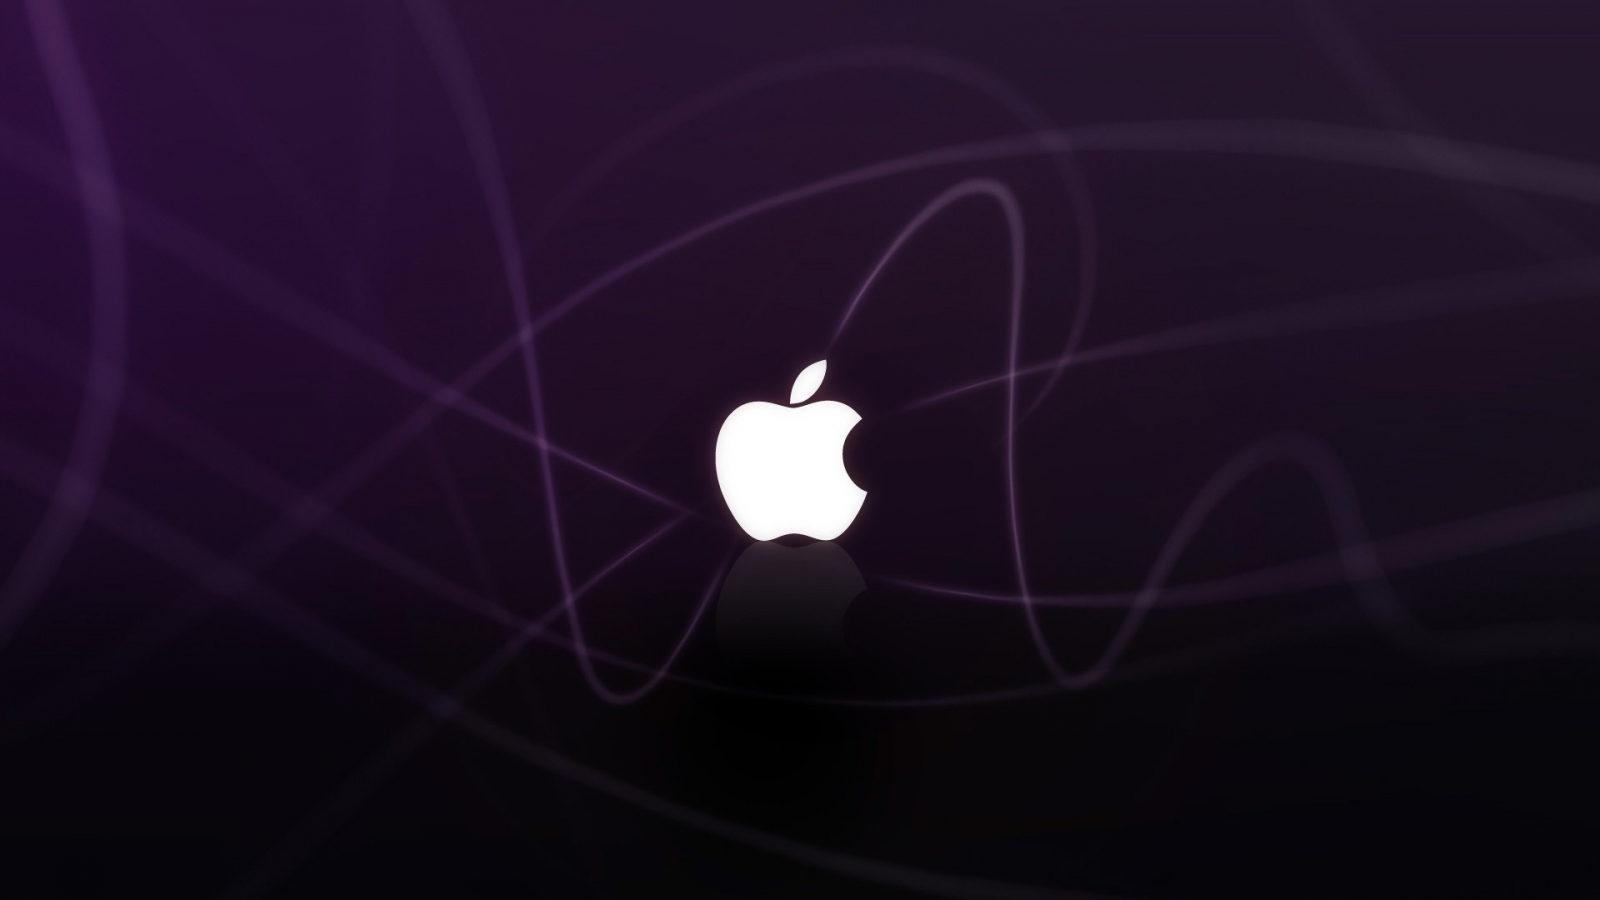 Purple Apple frequency for 1600 x 900 HDTV resolution